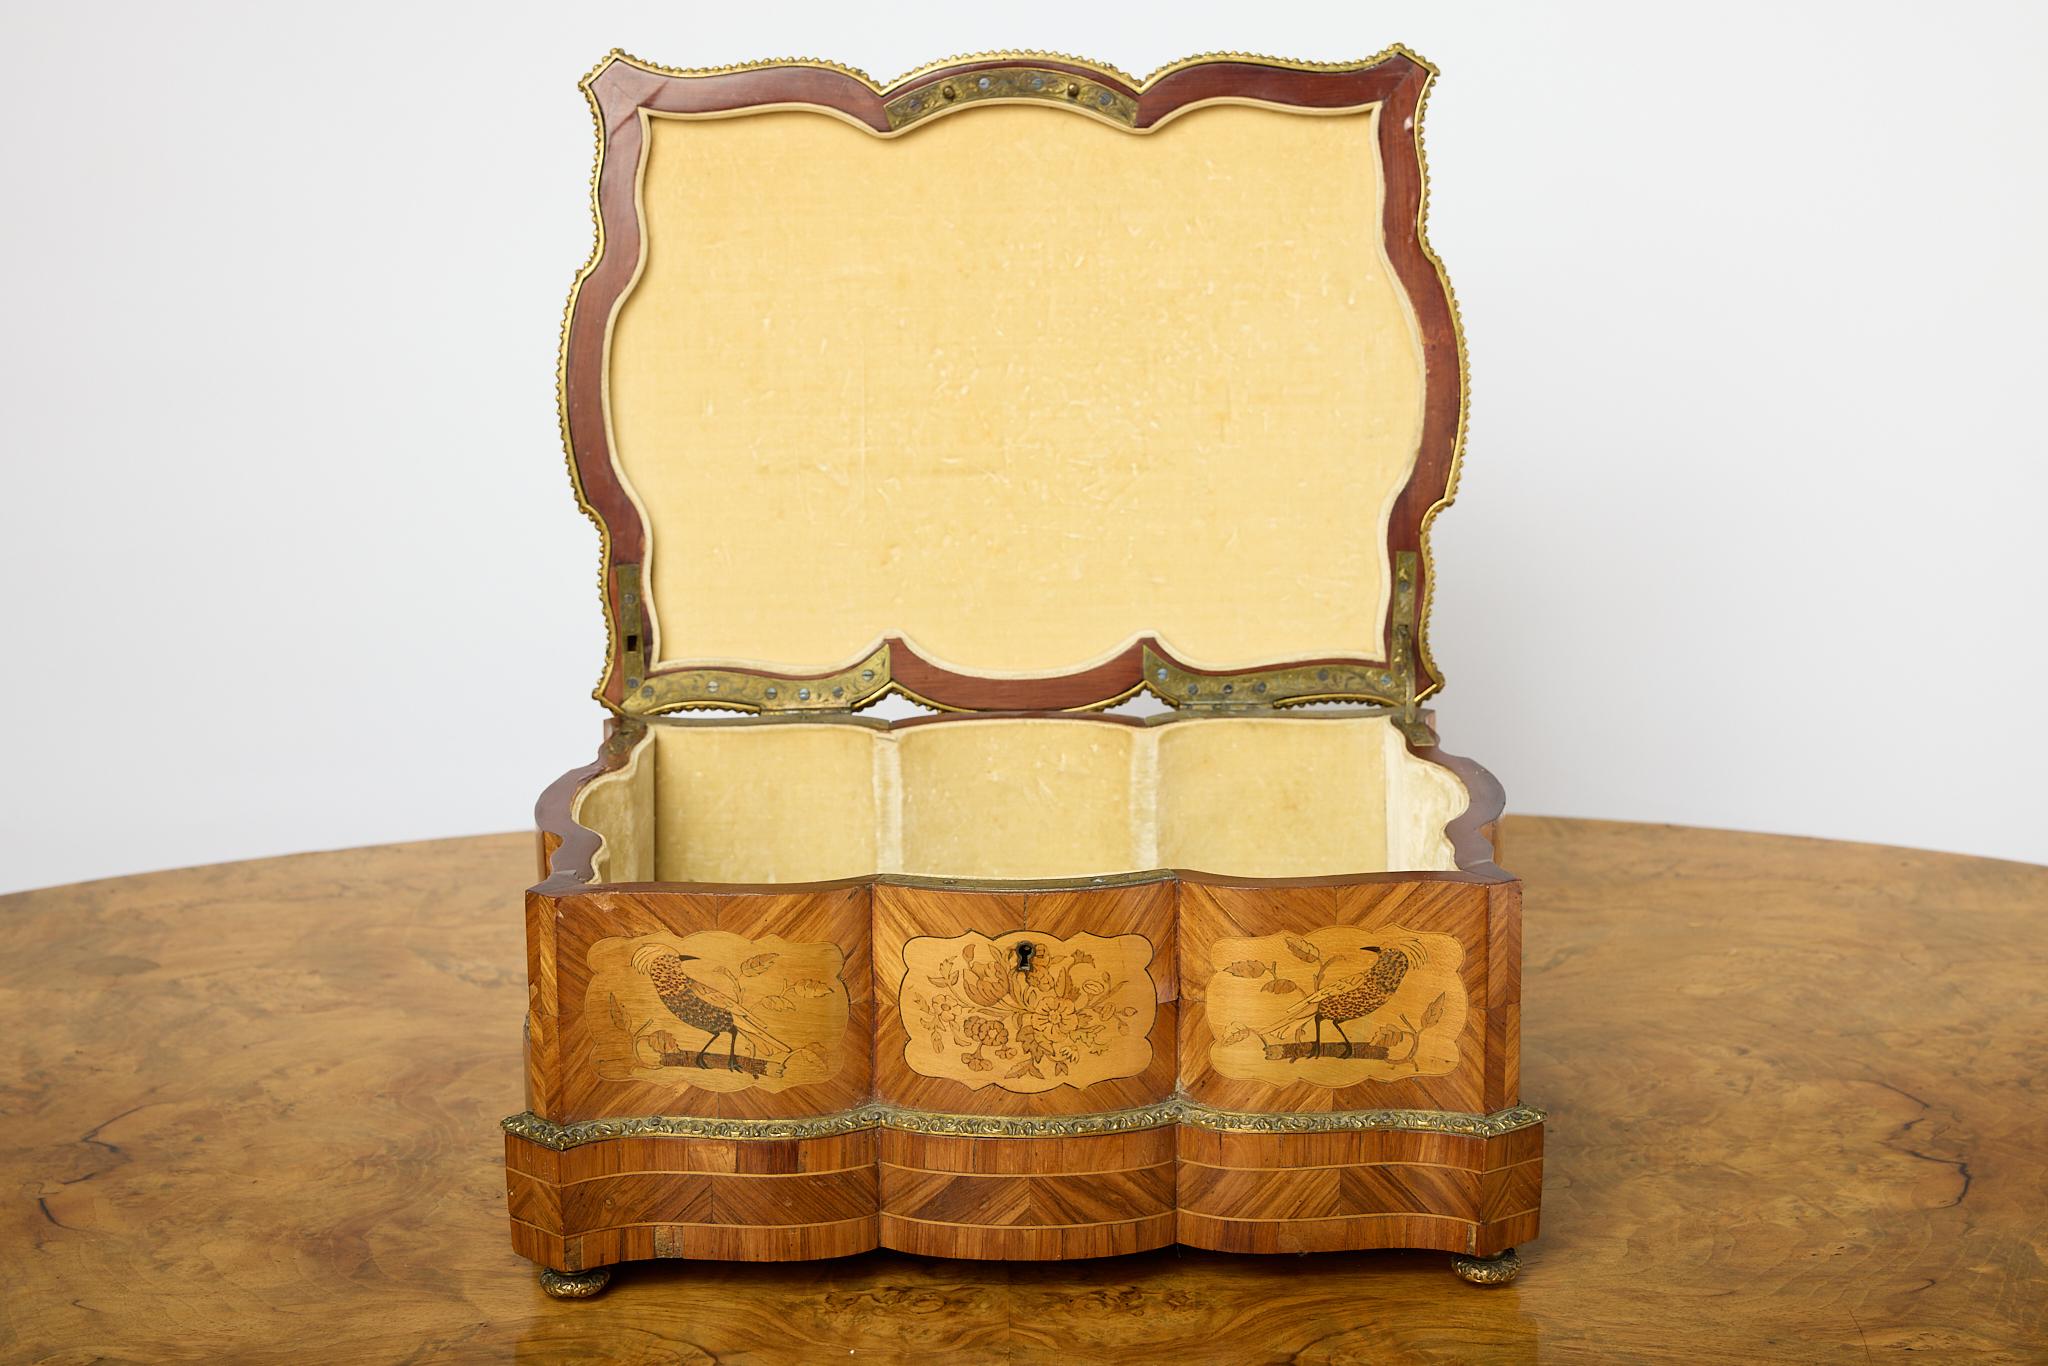 Beaux Arts Late 19th Century French Marquetry Jewelry/Dresser Box, Maison Vervelle For Sale